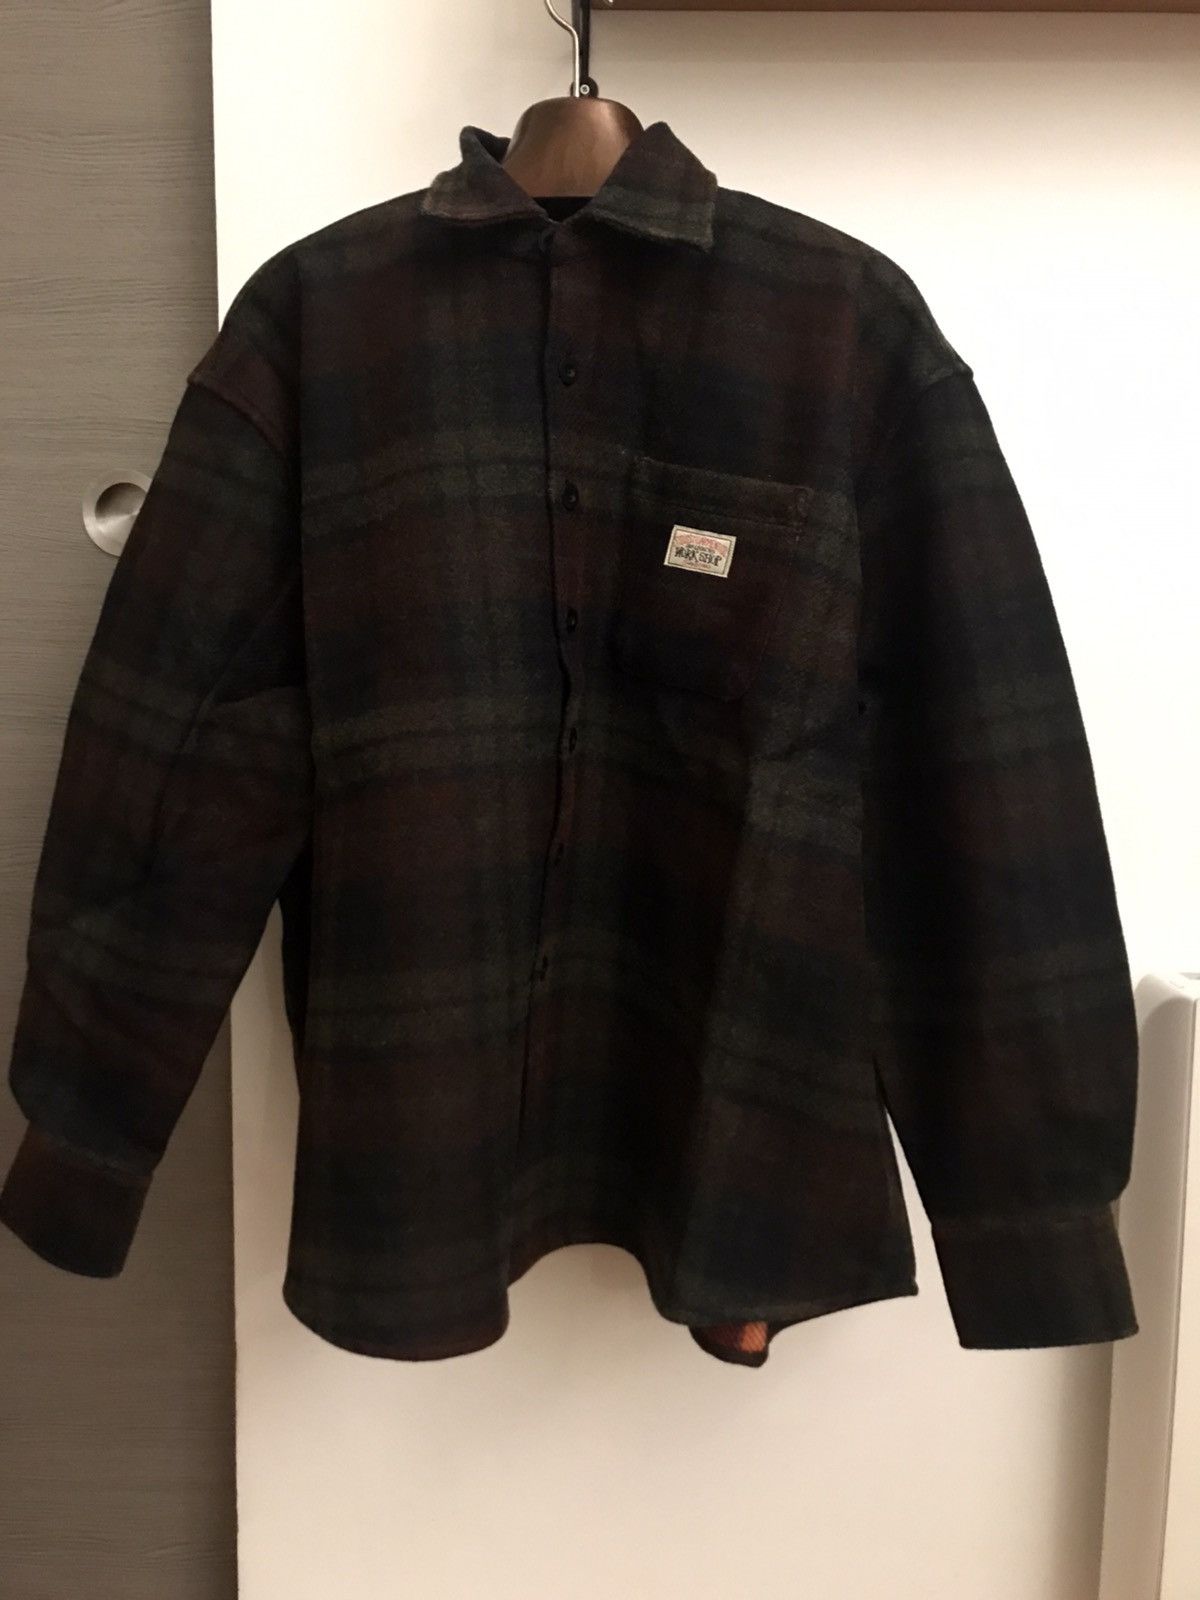 Our Legacy Our Legacy x Stussy borrowed shirt | Grailed